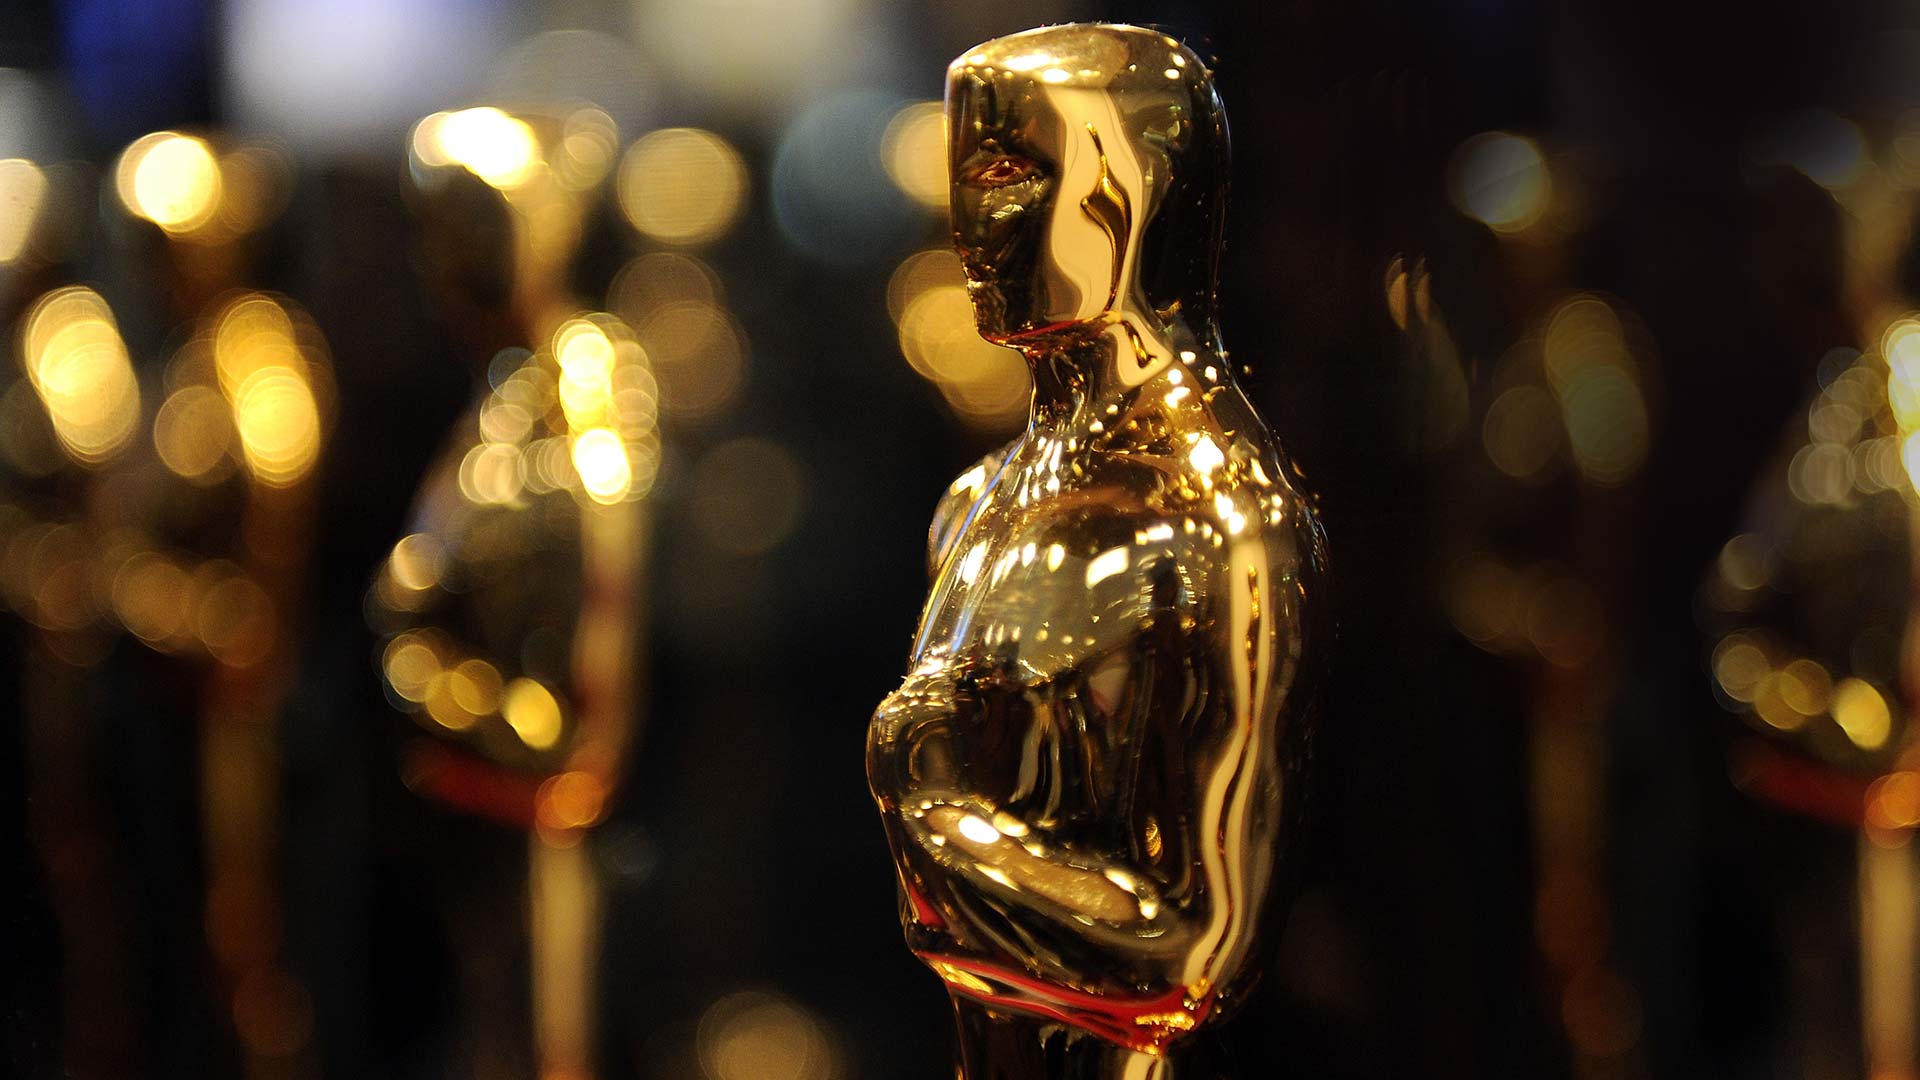 Yes, the Oscars will have some music